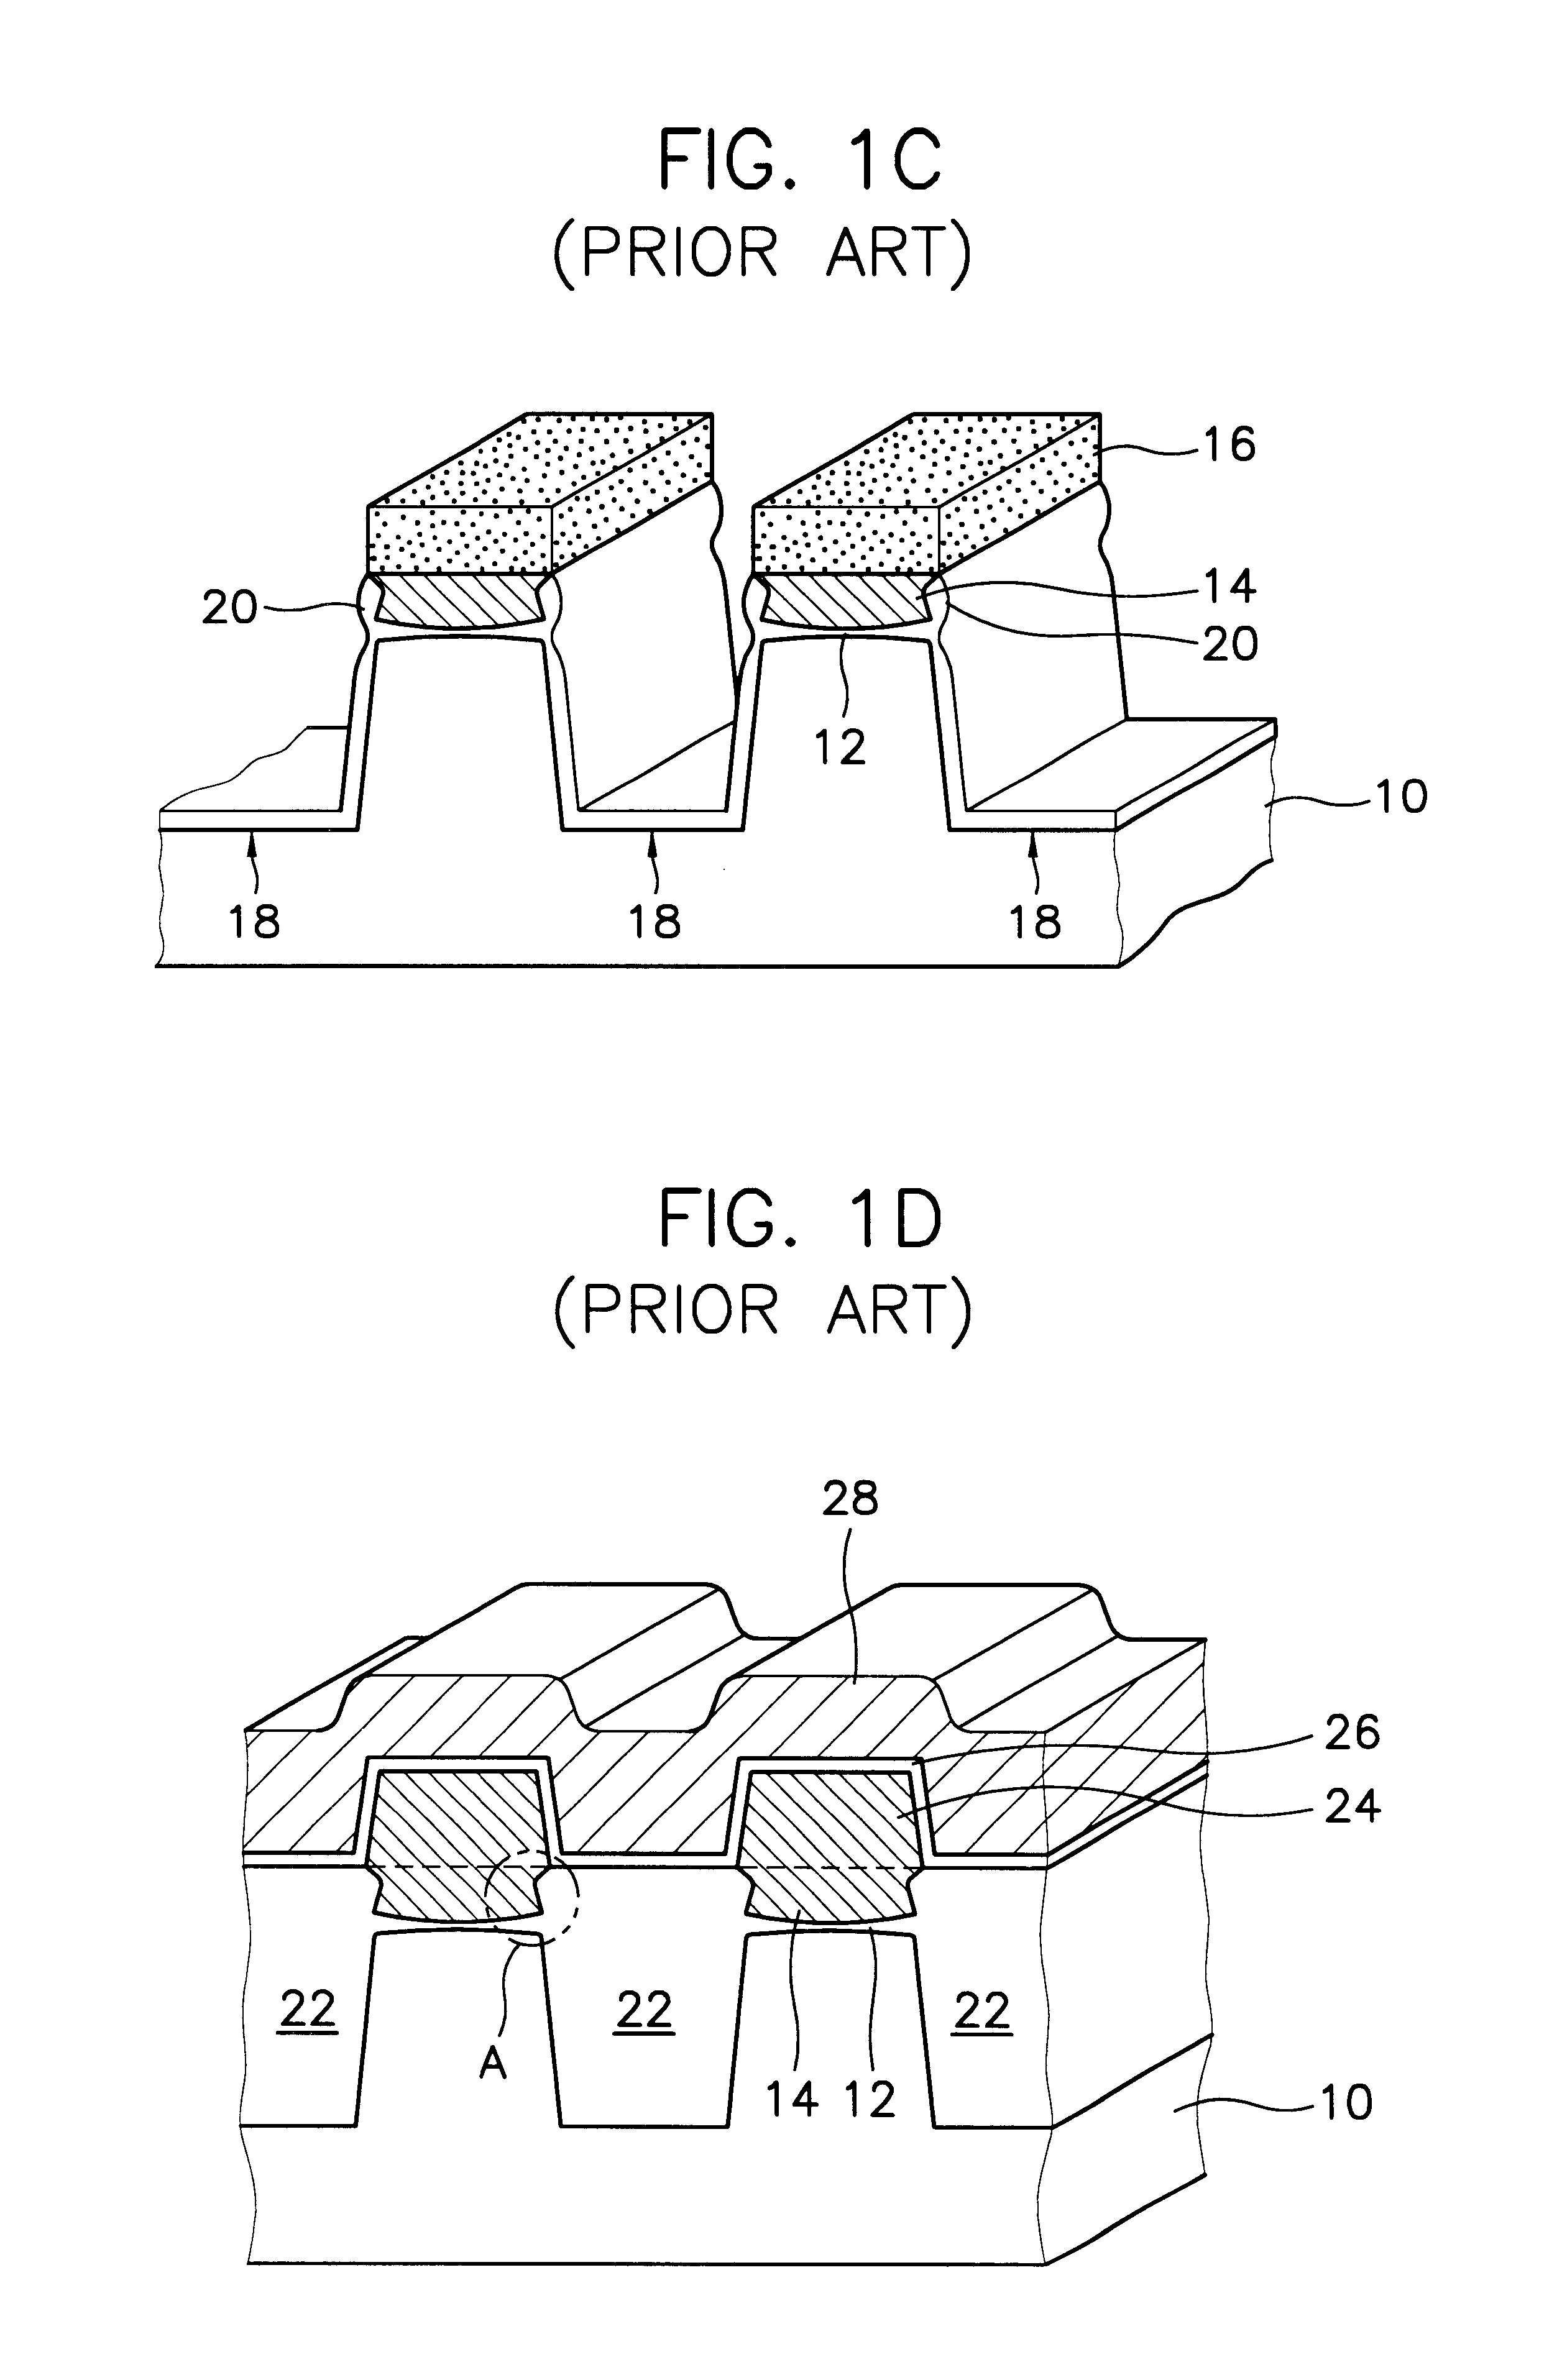 Semiconductor device having desired gate profile and method of making the same